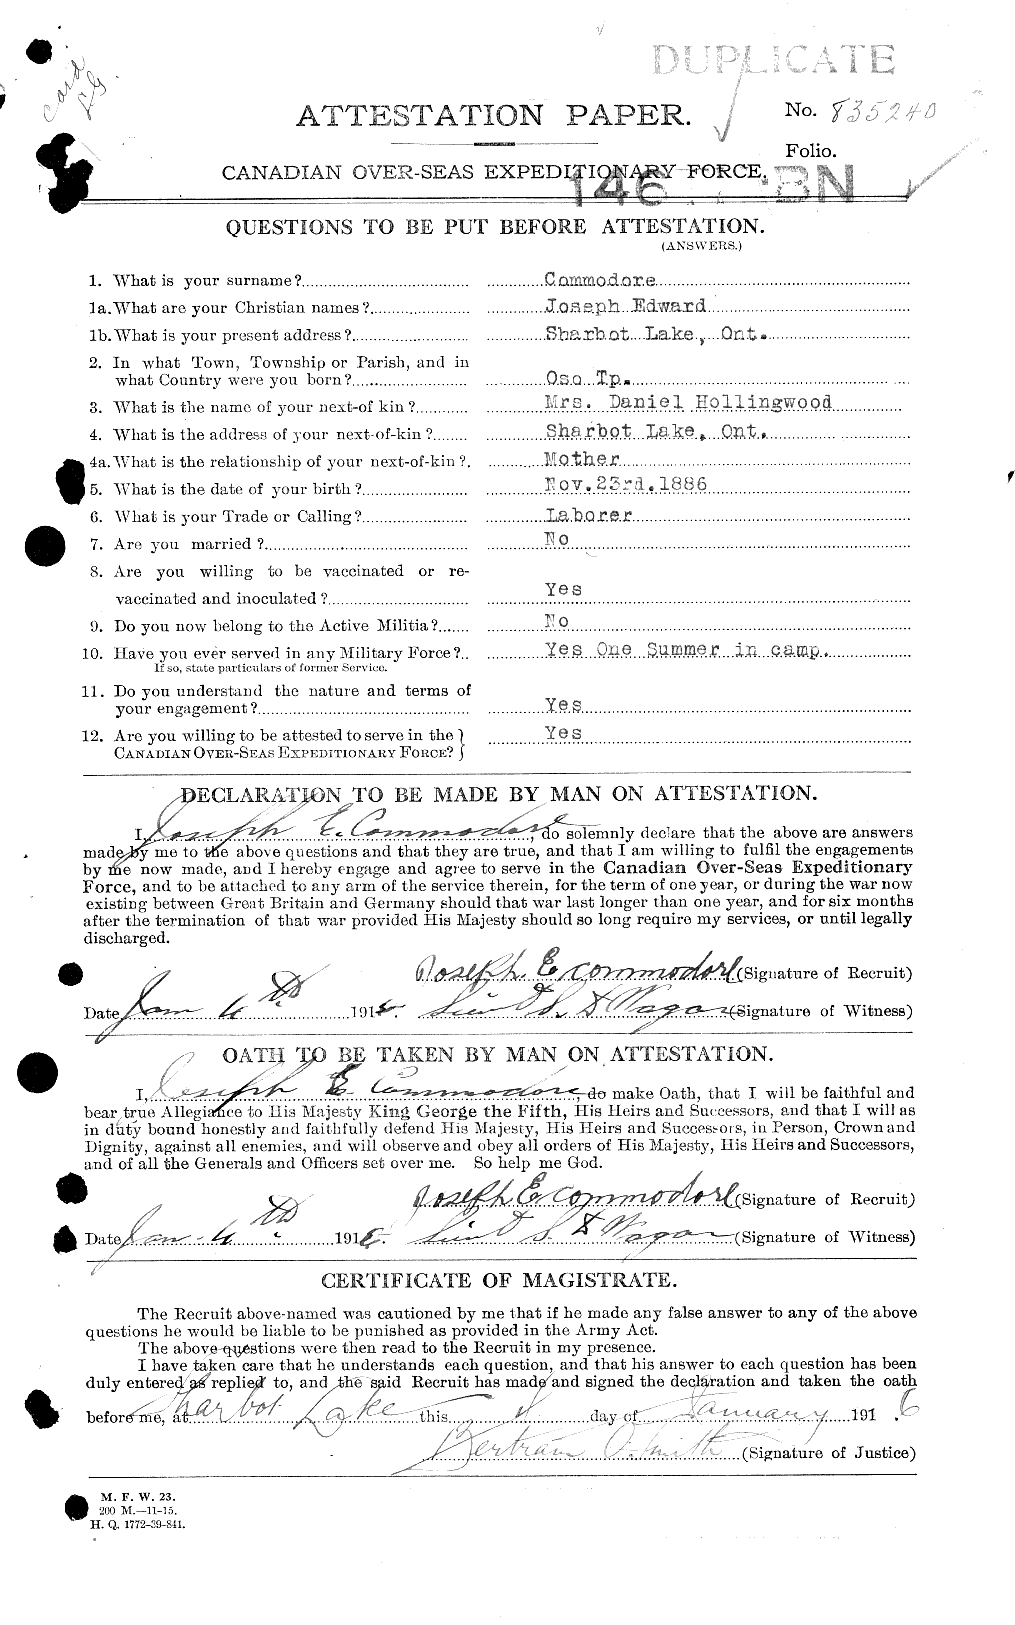 Personnel Records of the First World War - CEF 042590a